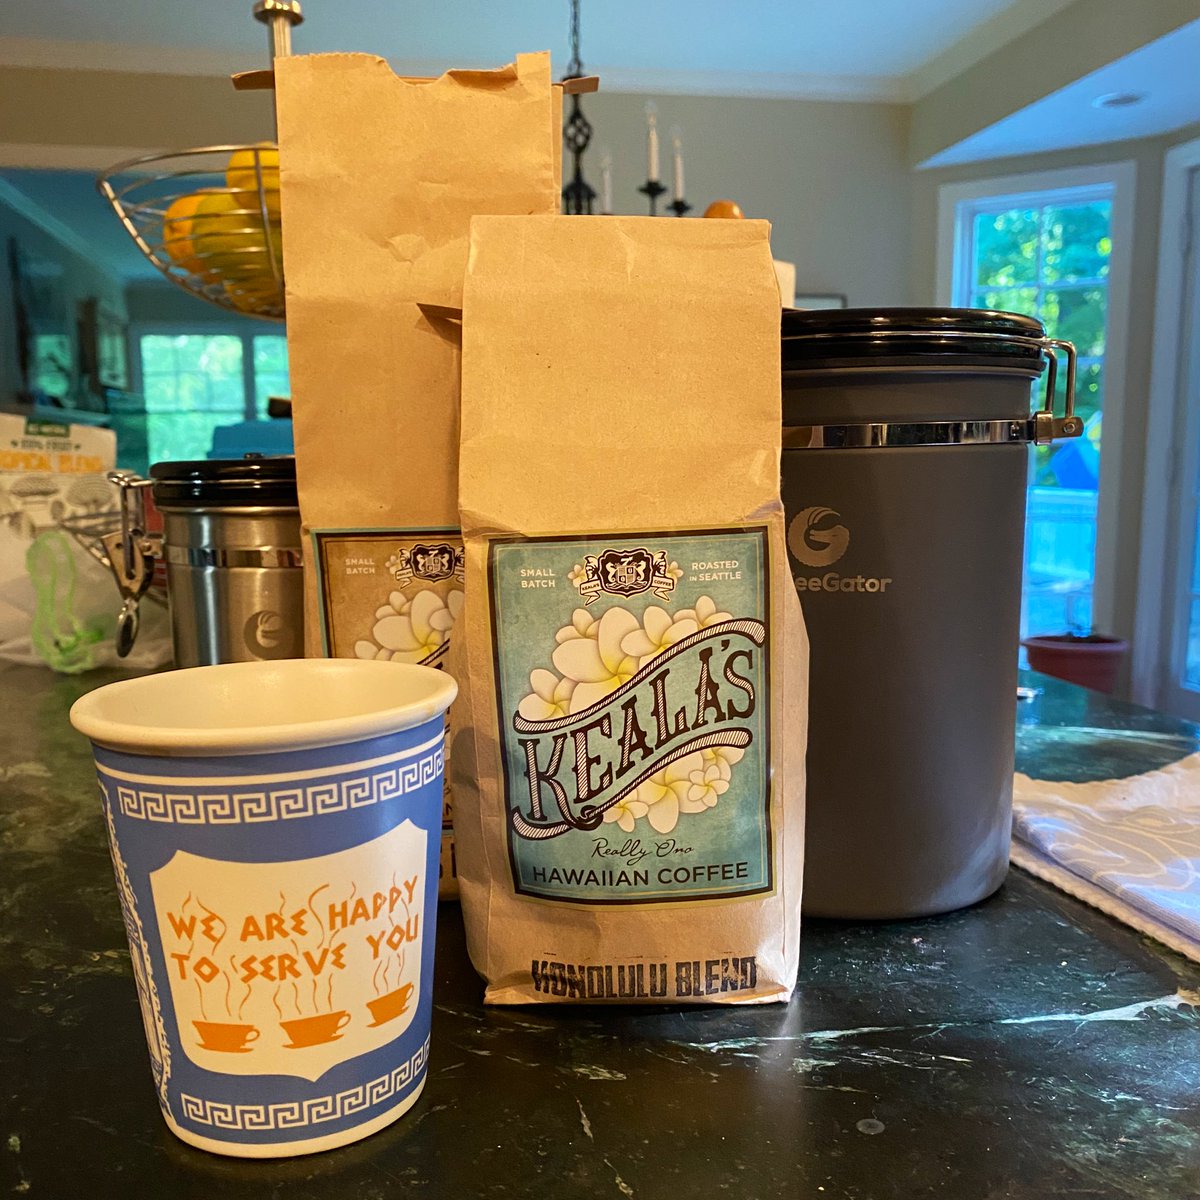 Not a new entry, but I loved the Bean Box taster of the  Keala’s Coffee Honolulu Blend so much I made a direct order, plus some decaf for the wifey. Get it here (with free shipping):  https://sevencoffeeroasters.com/collections/kealas-hawaiian-coffee/products/hawaiian-coffee-honolulu